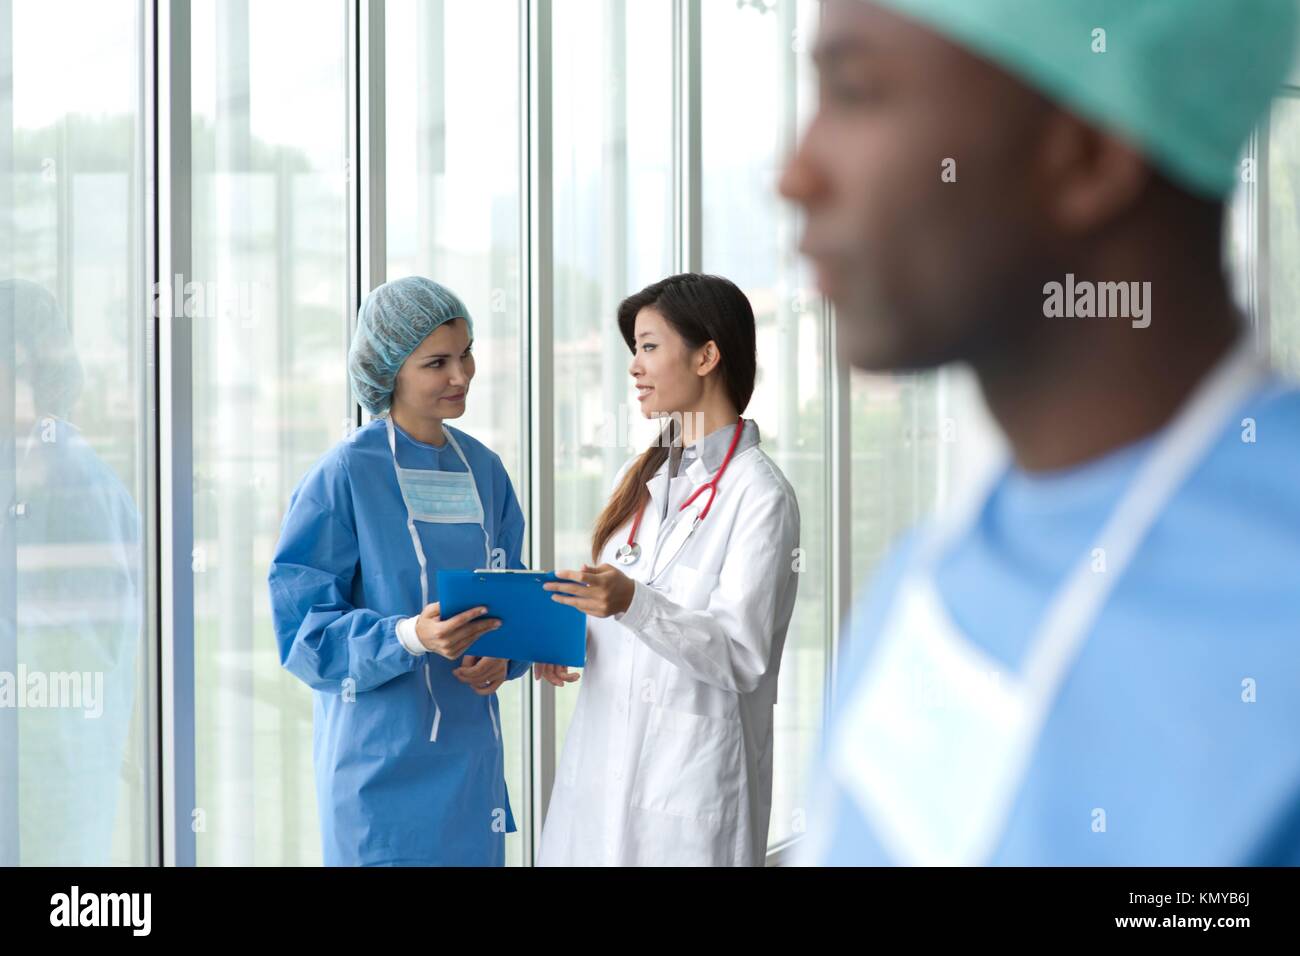 Medical team, focus on background Stock Photo